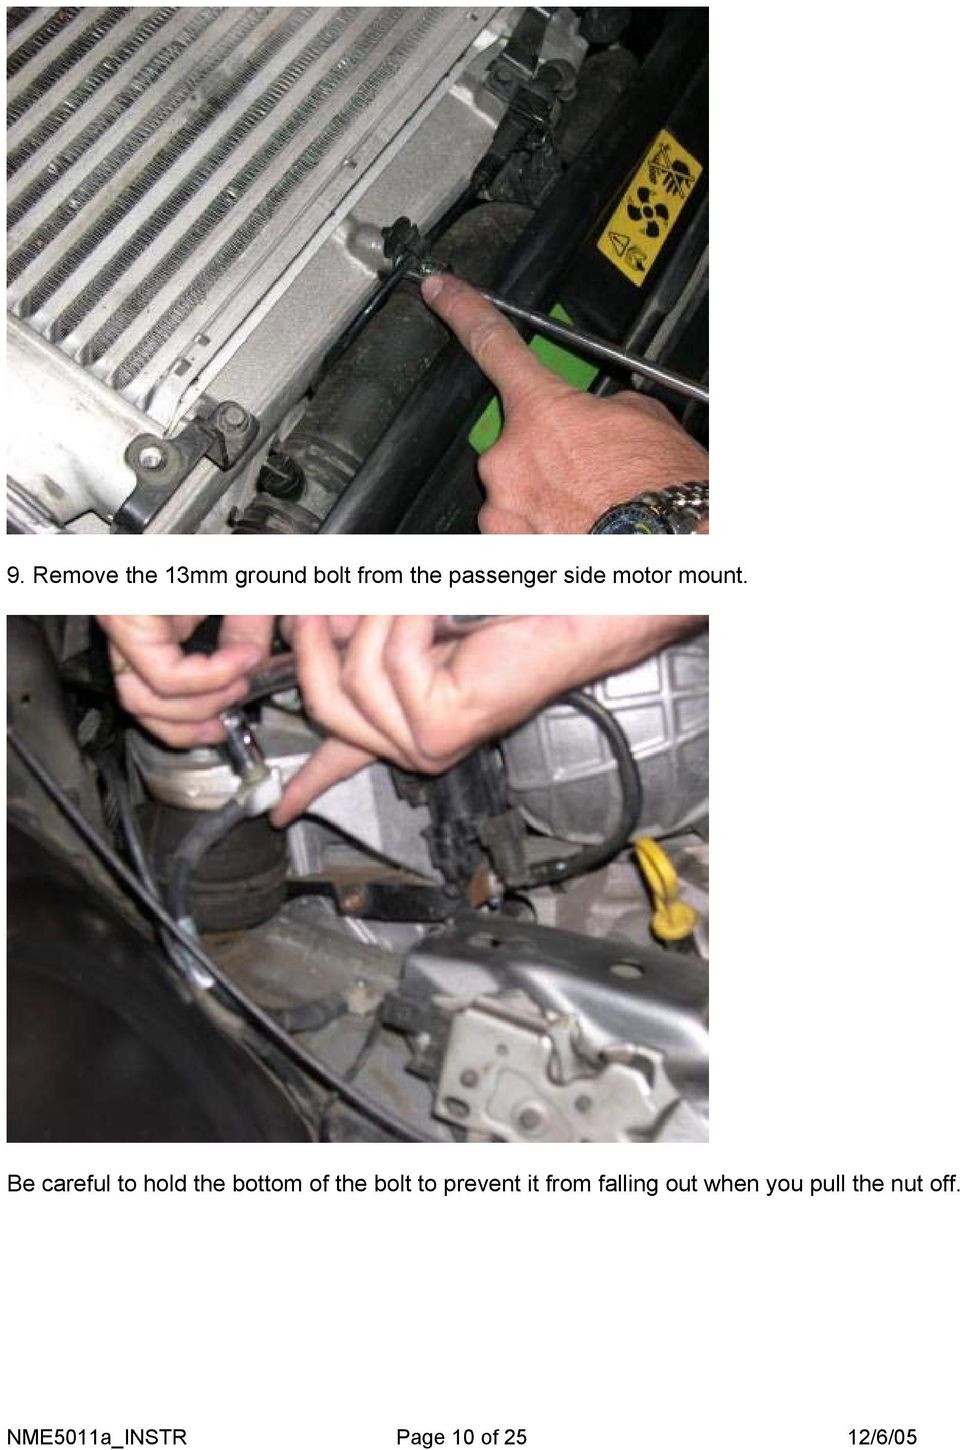 Be careful to hold the bottom of the bolt to